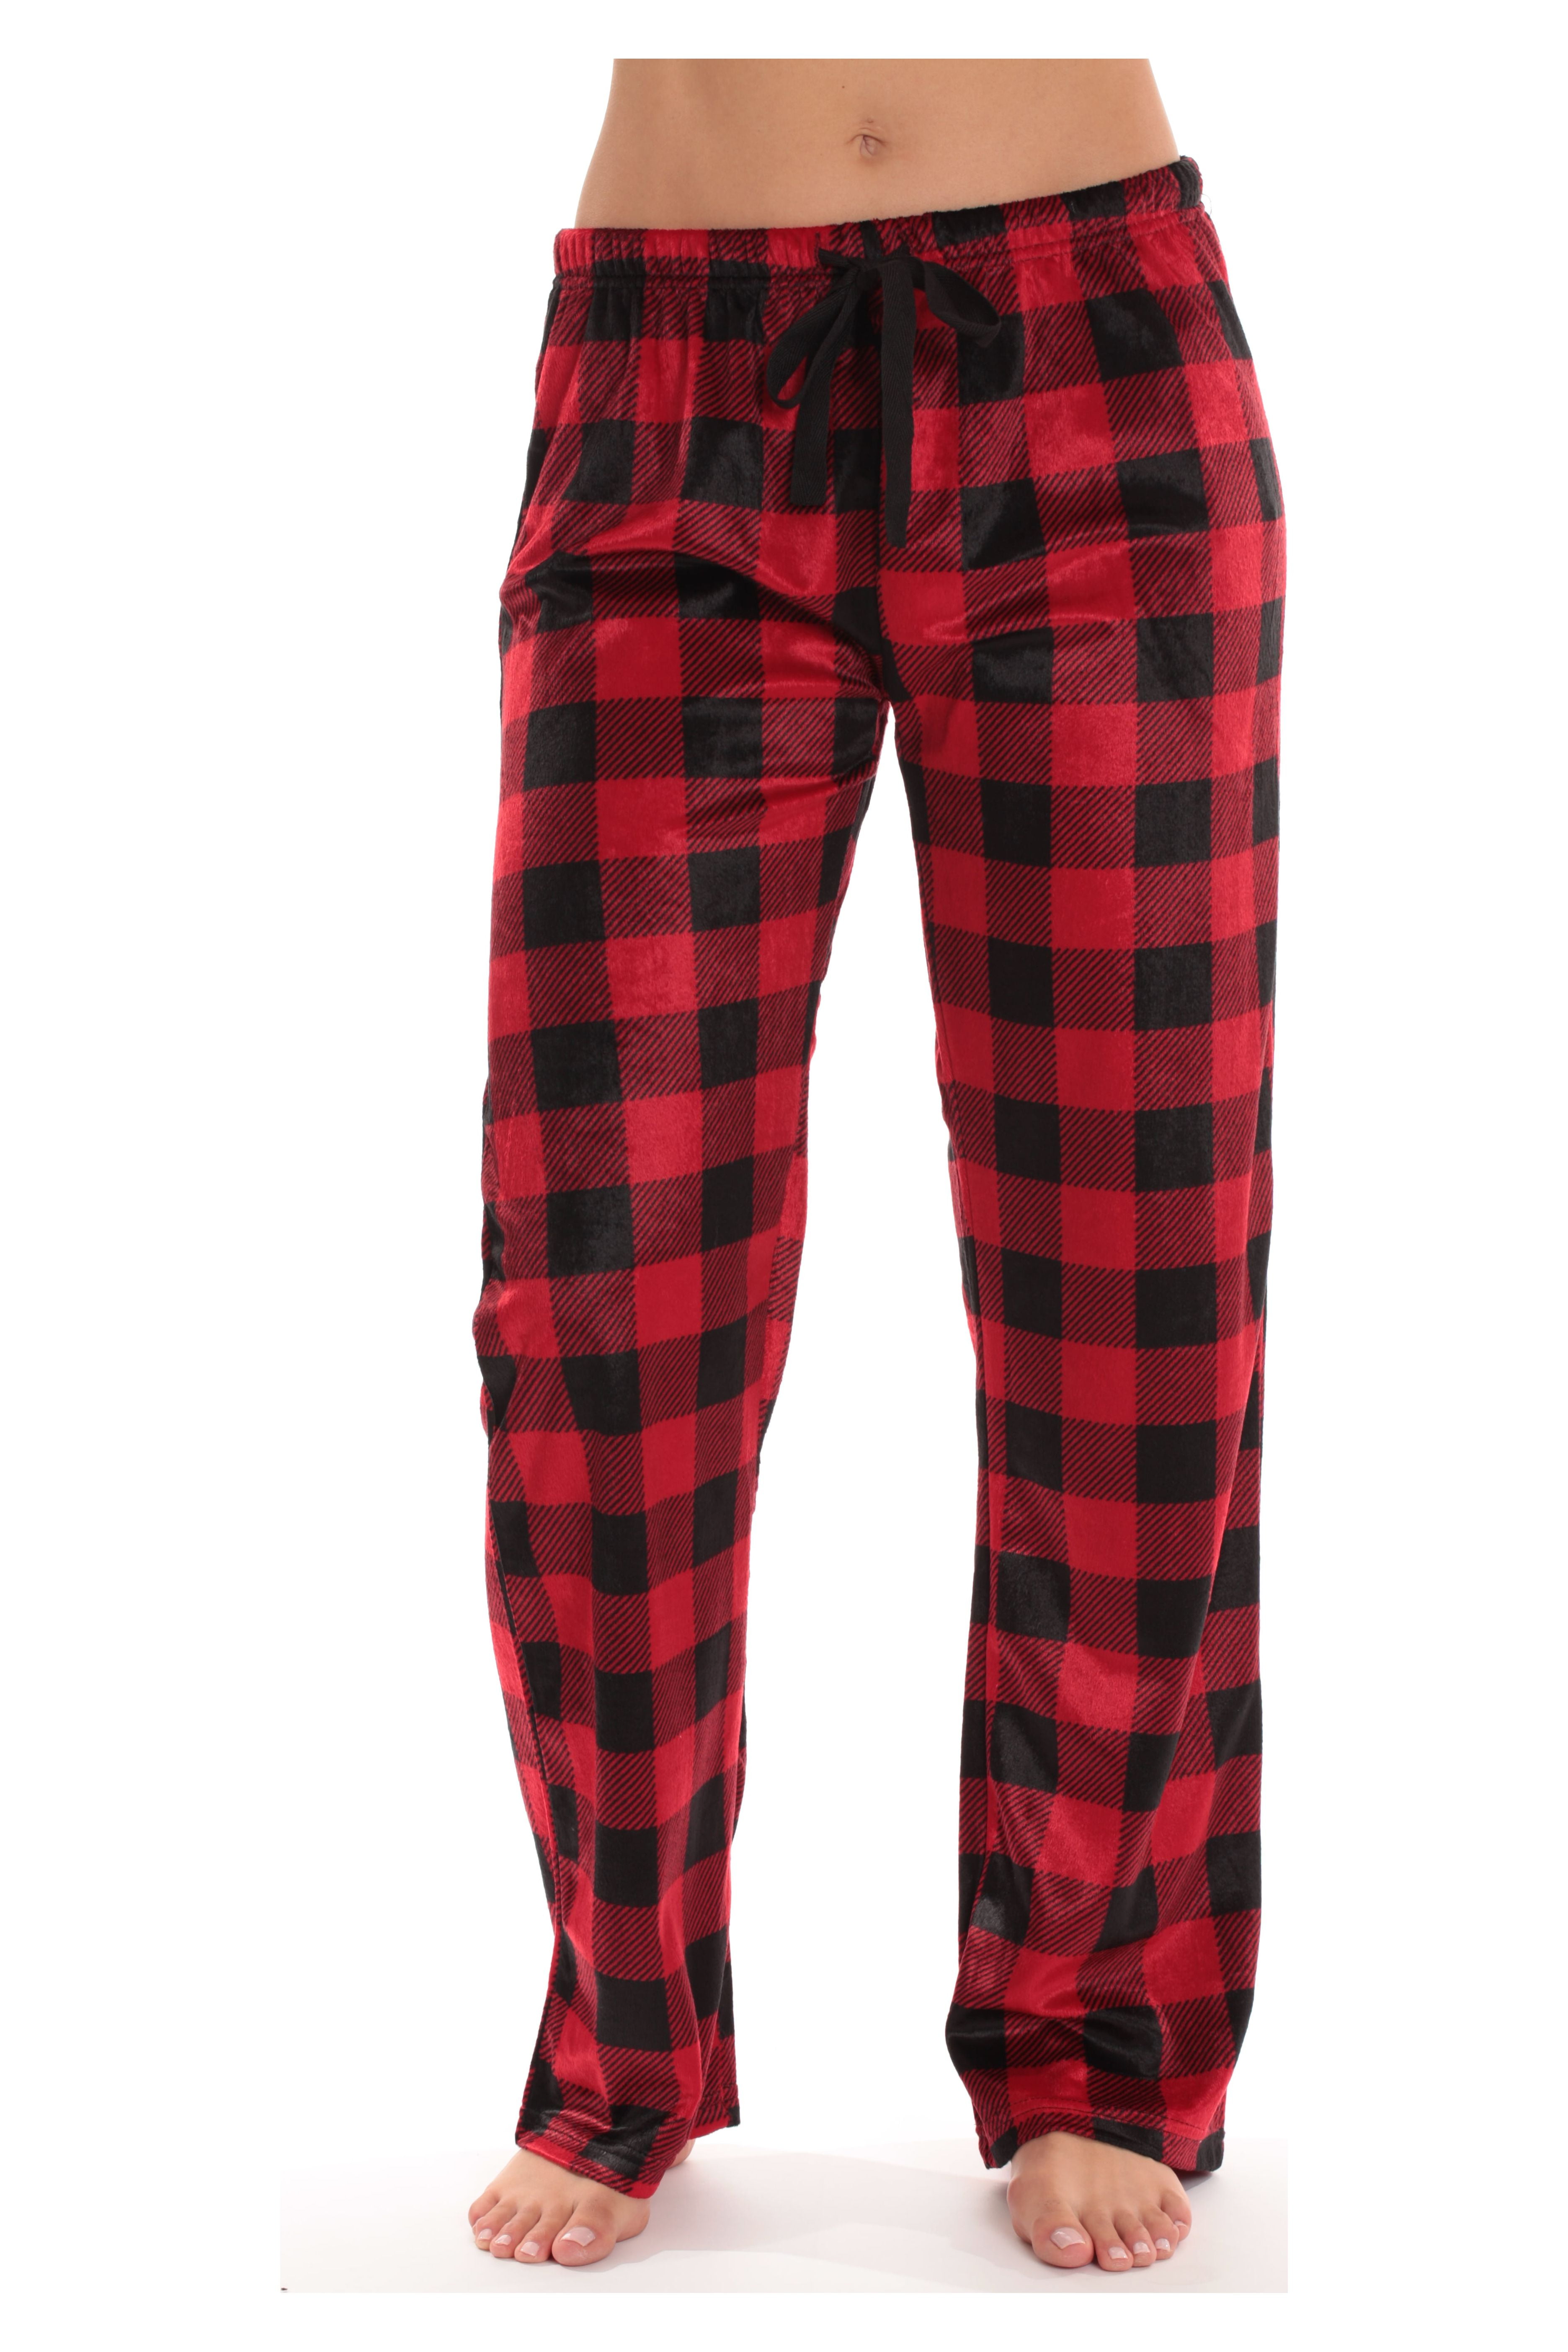 PLAID CHAOS PANT (red) – Posers Hollywood